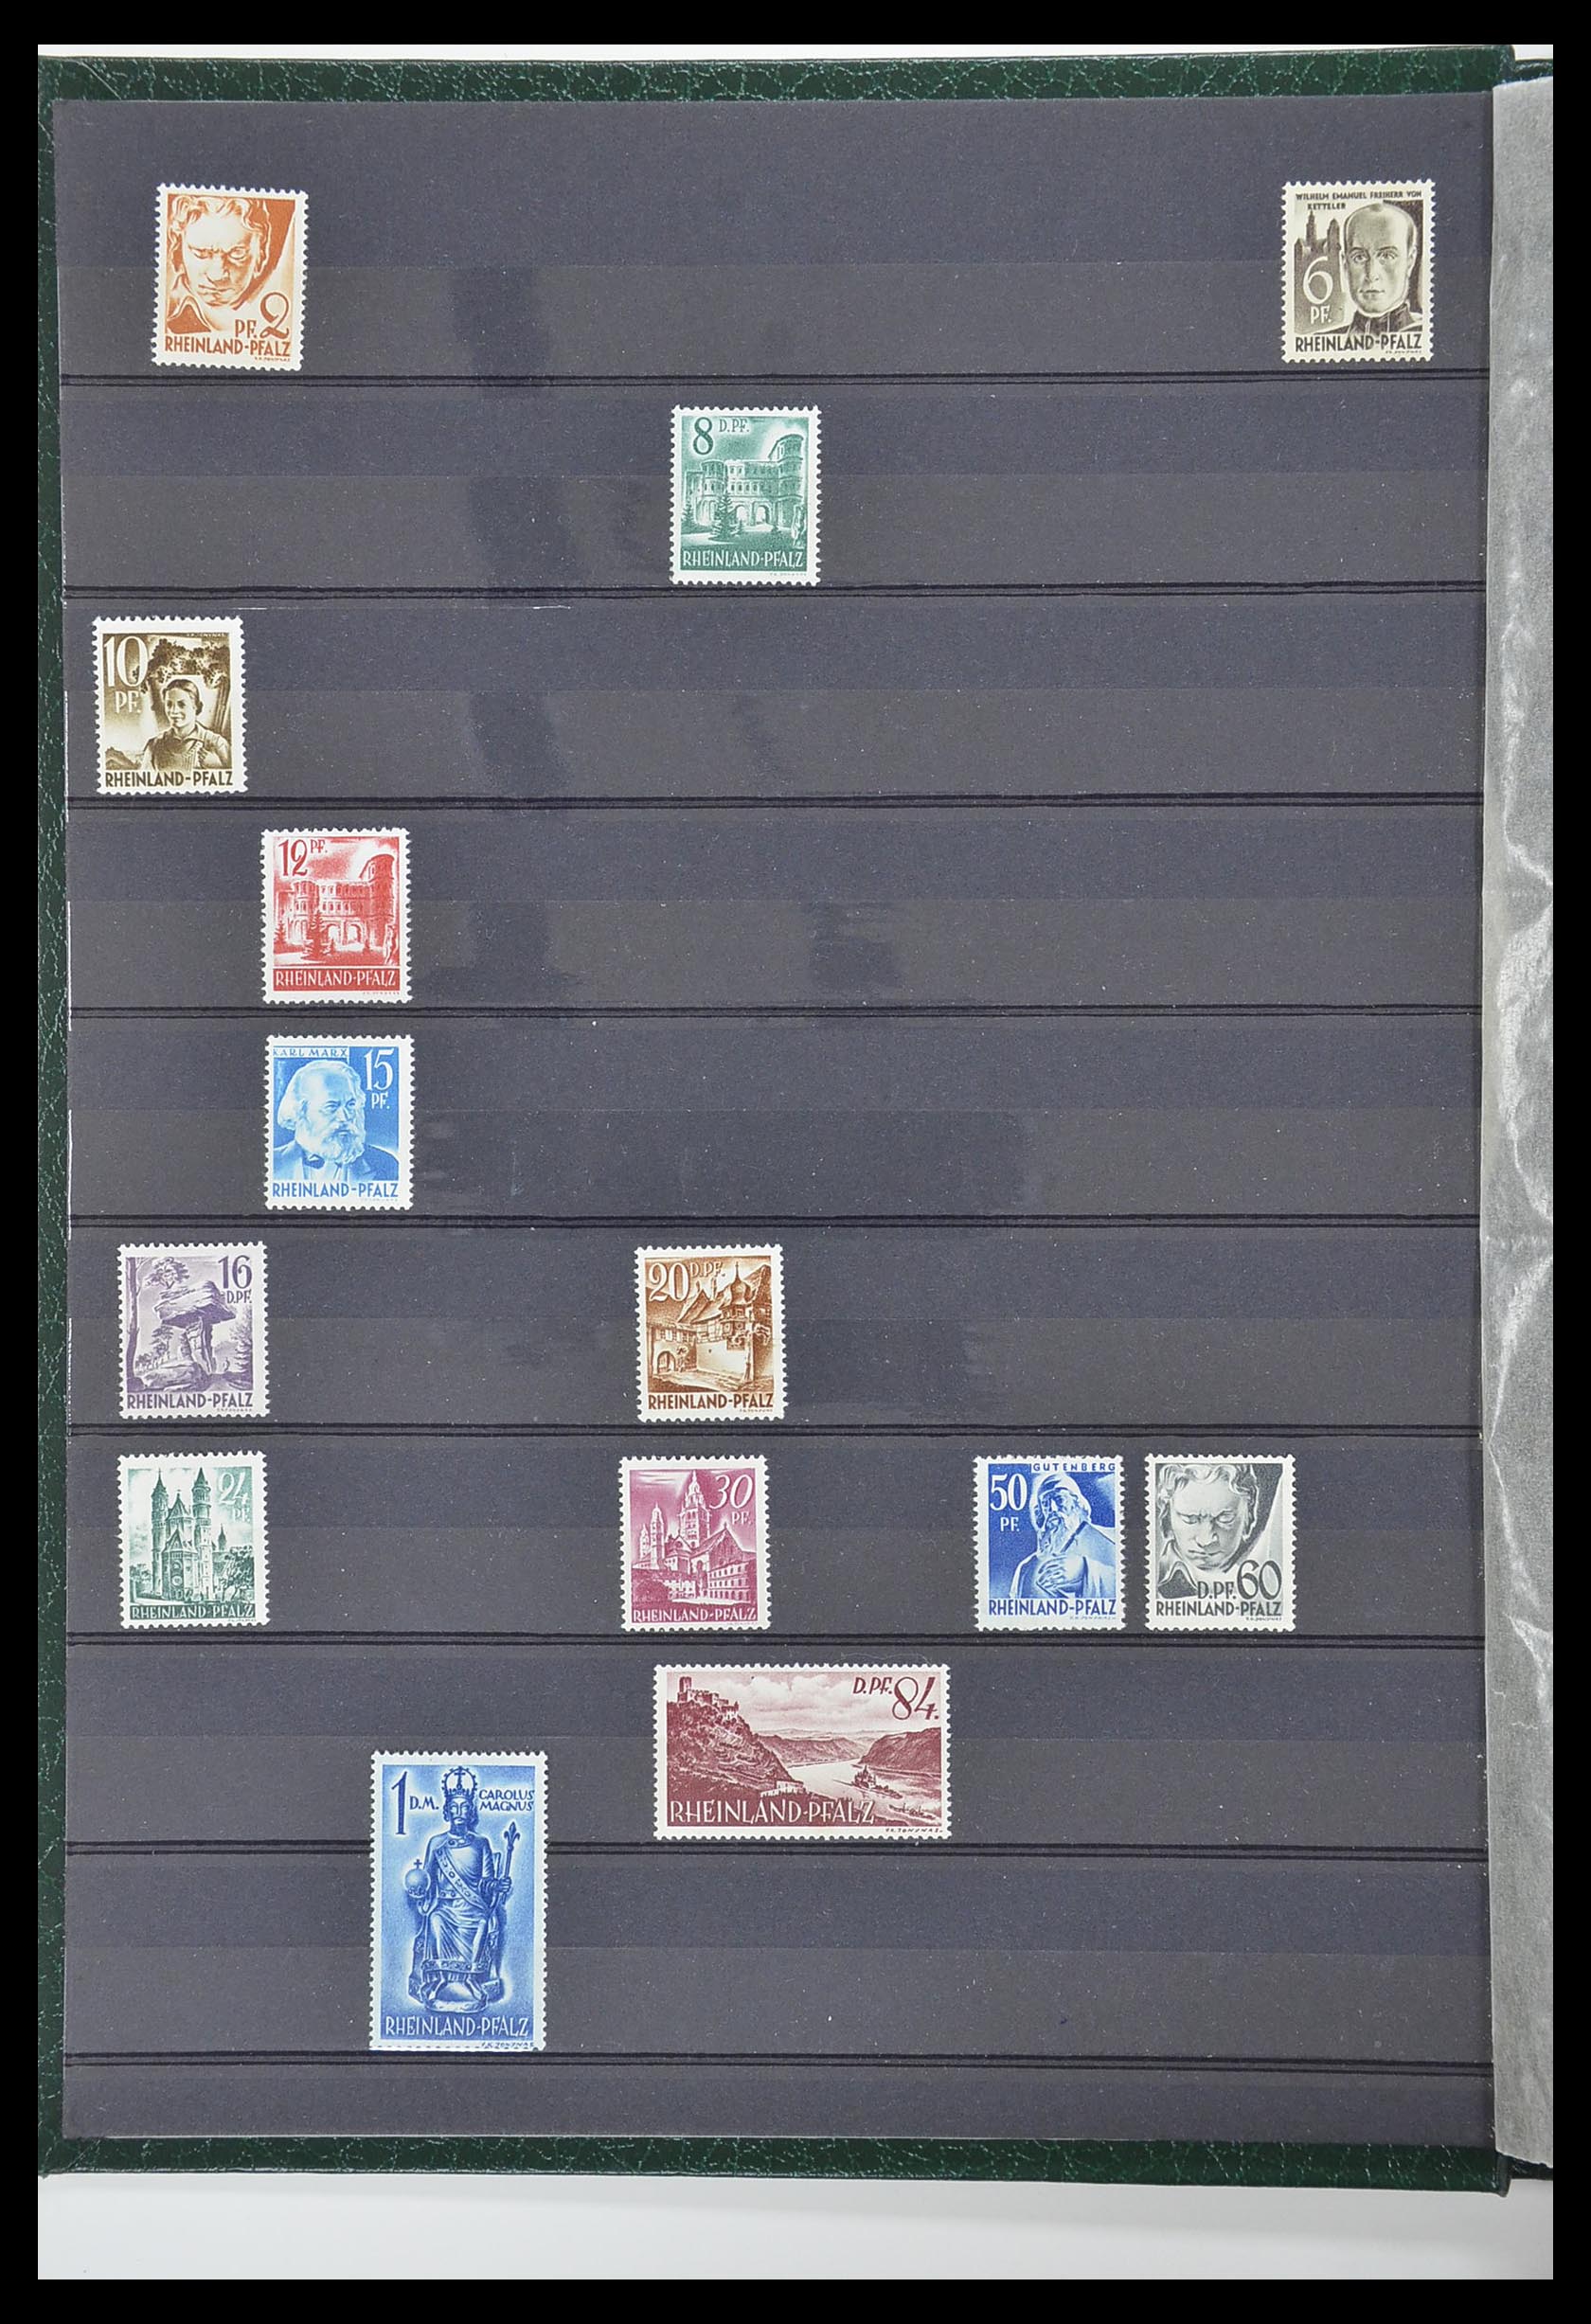 33553 085 - Stamp collection 33553 German territories and occupations 1939-1948.